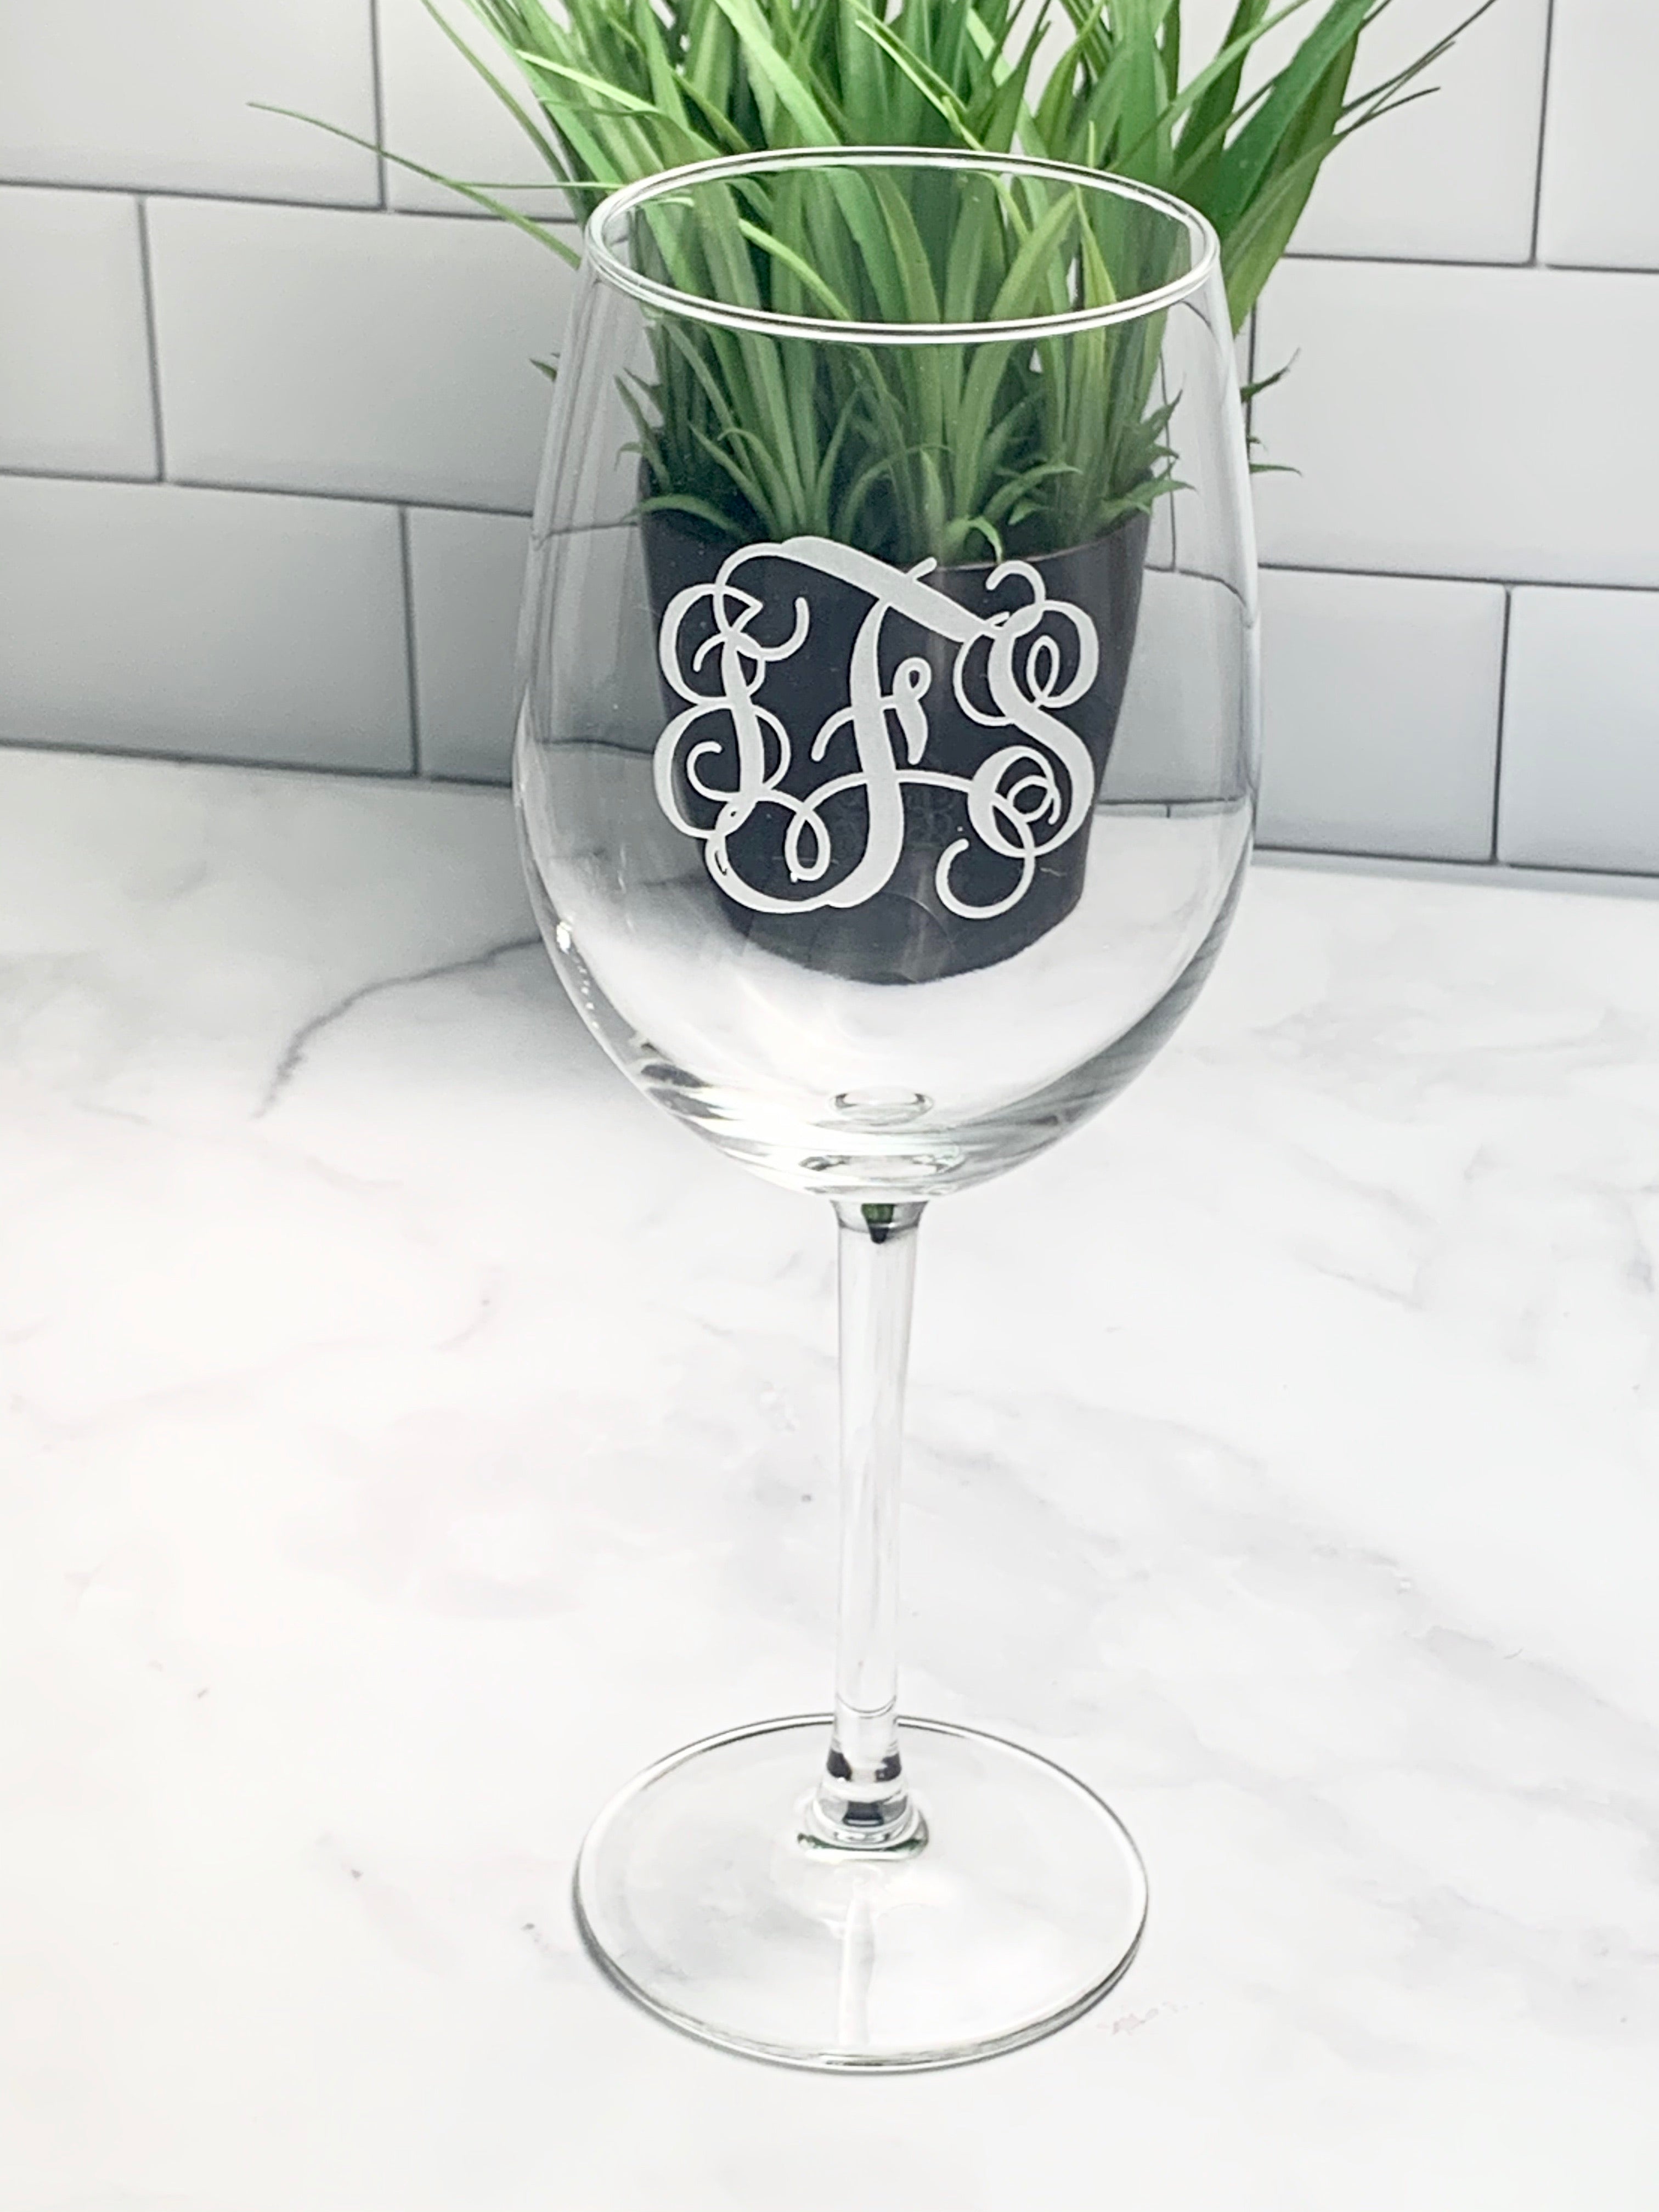 Set of 4 Personalized Wine Glasses With Hand Cut Monogram